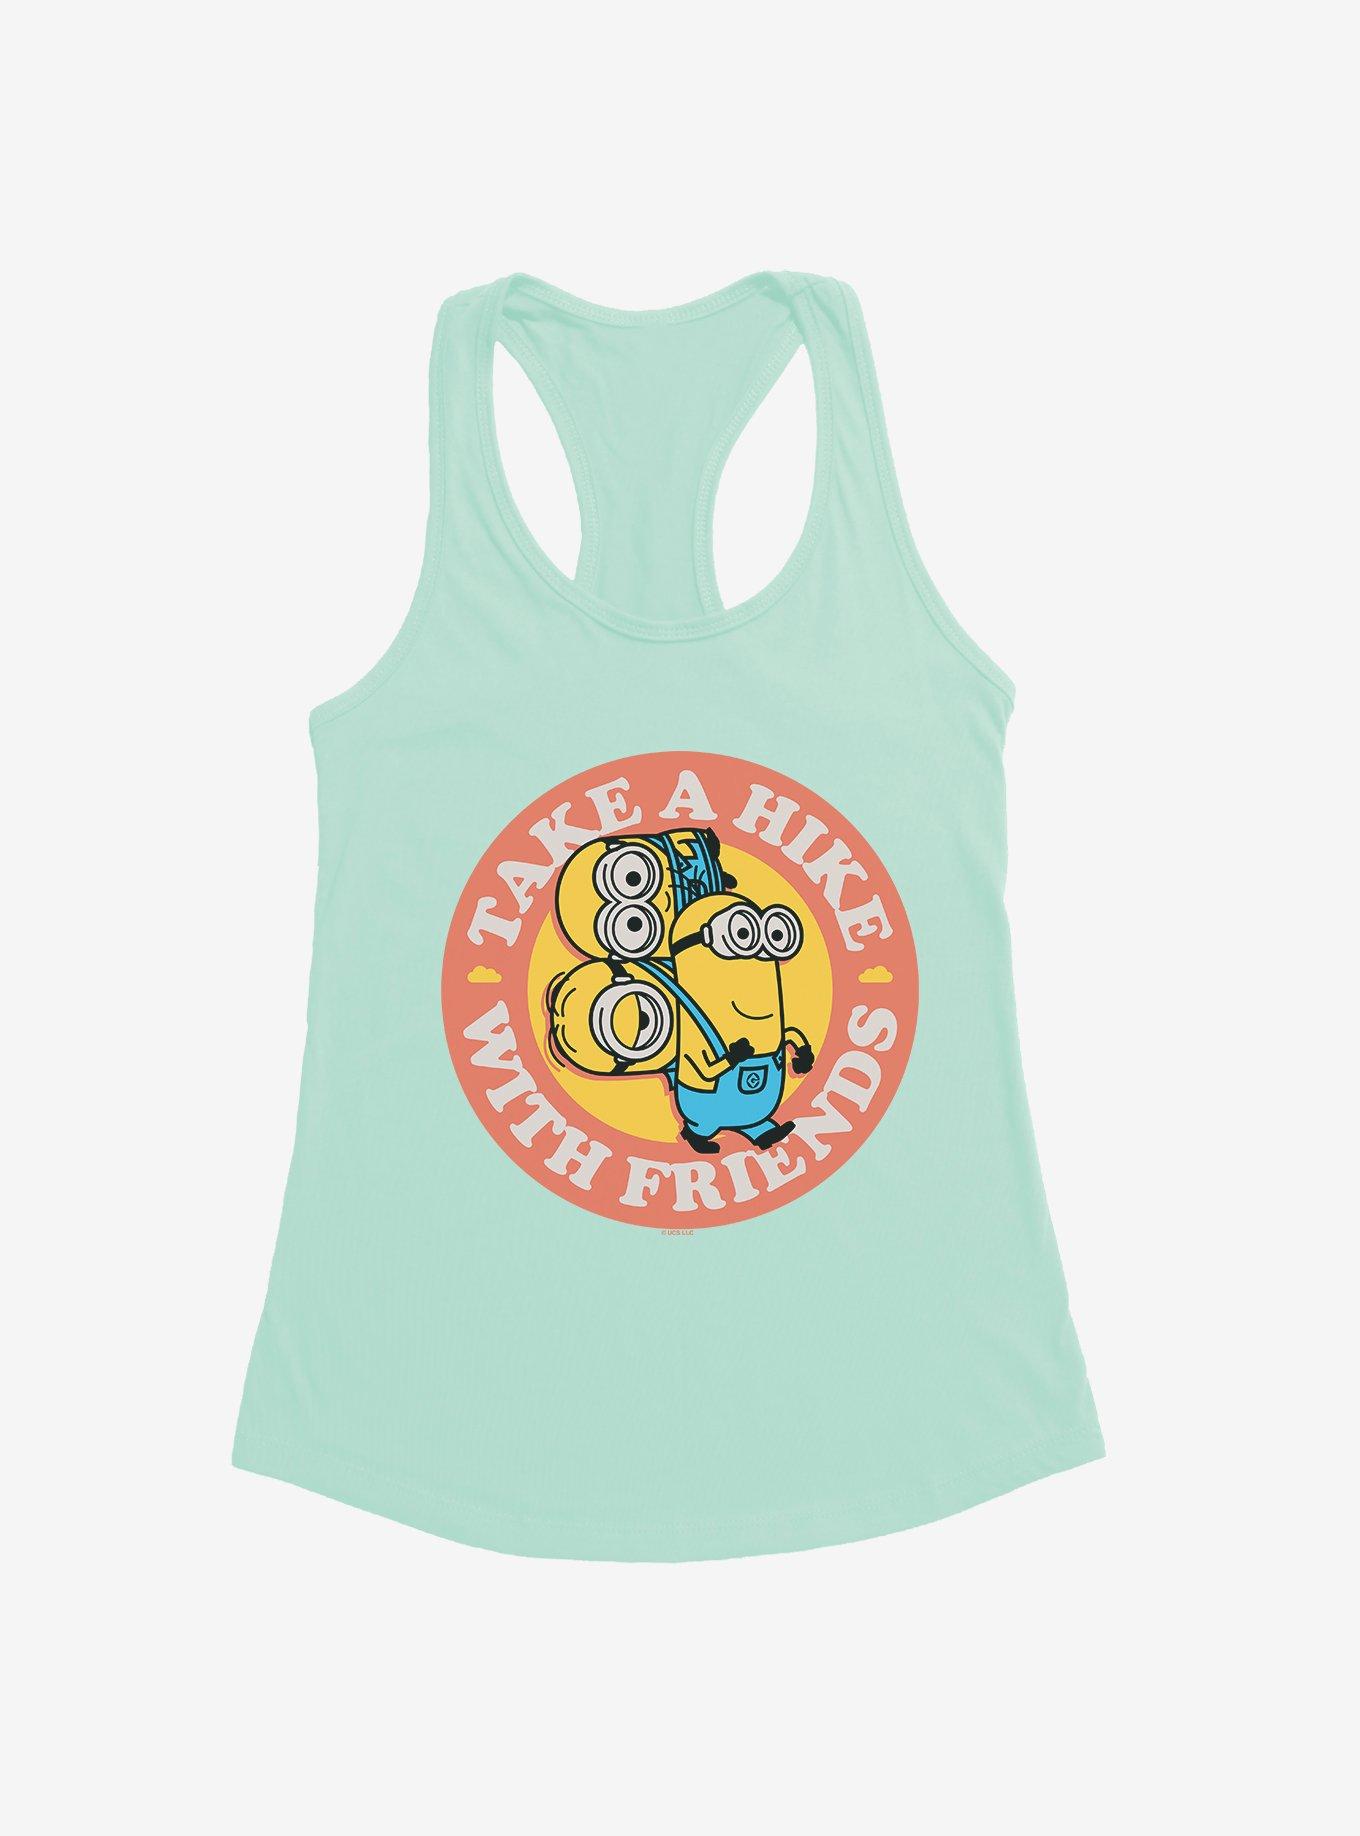 Minions Hike With Friends Womens Tank Top, MINT, hi-res